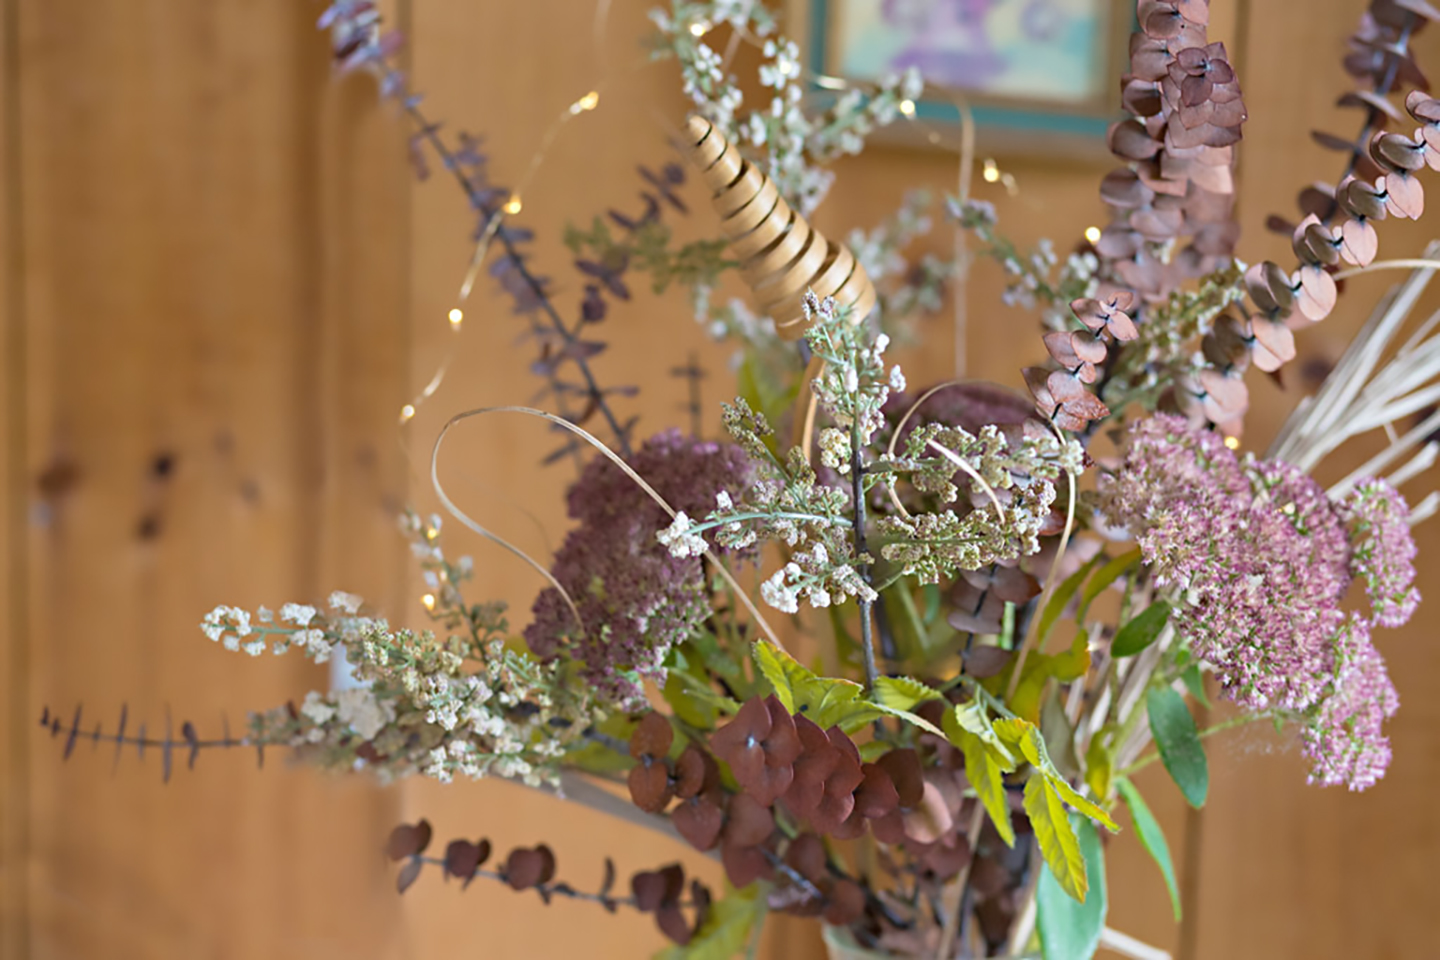 Decorative flowers in the Rustic Cabin